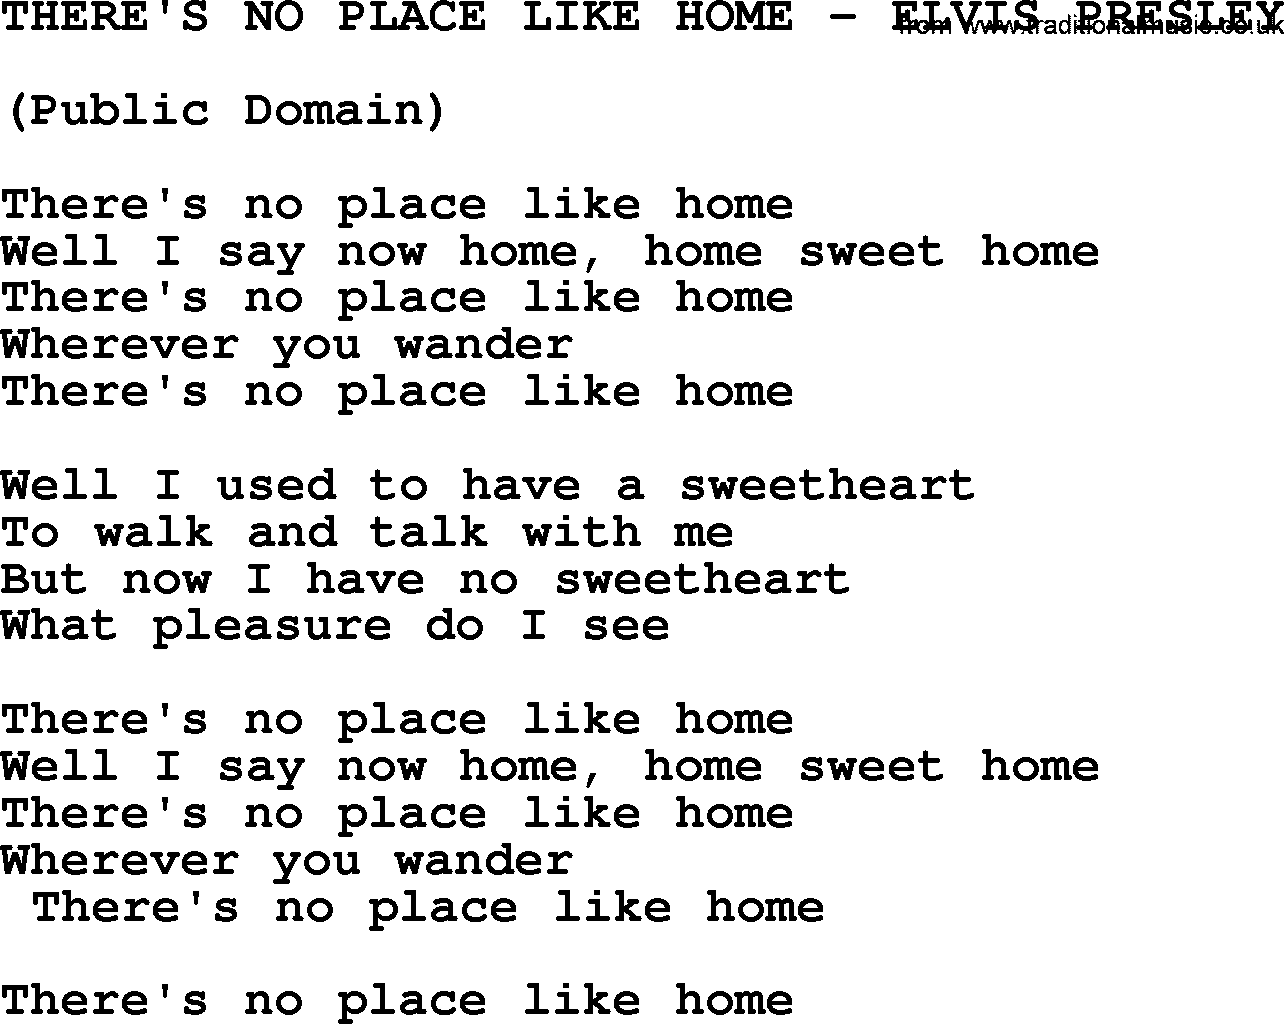 Elvis Presley song: There's No Place Like Home-Elvis Presley-.txt lyrics and chords